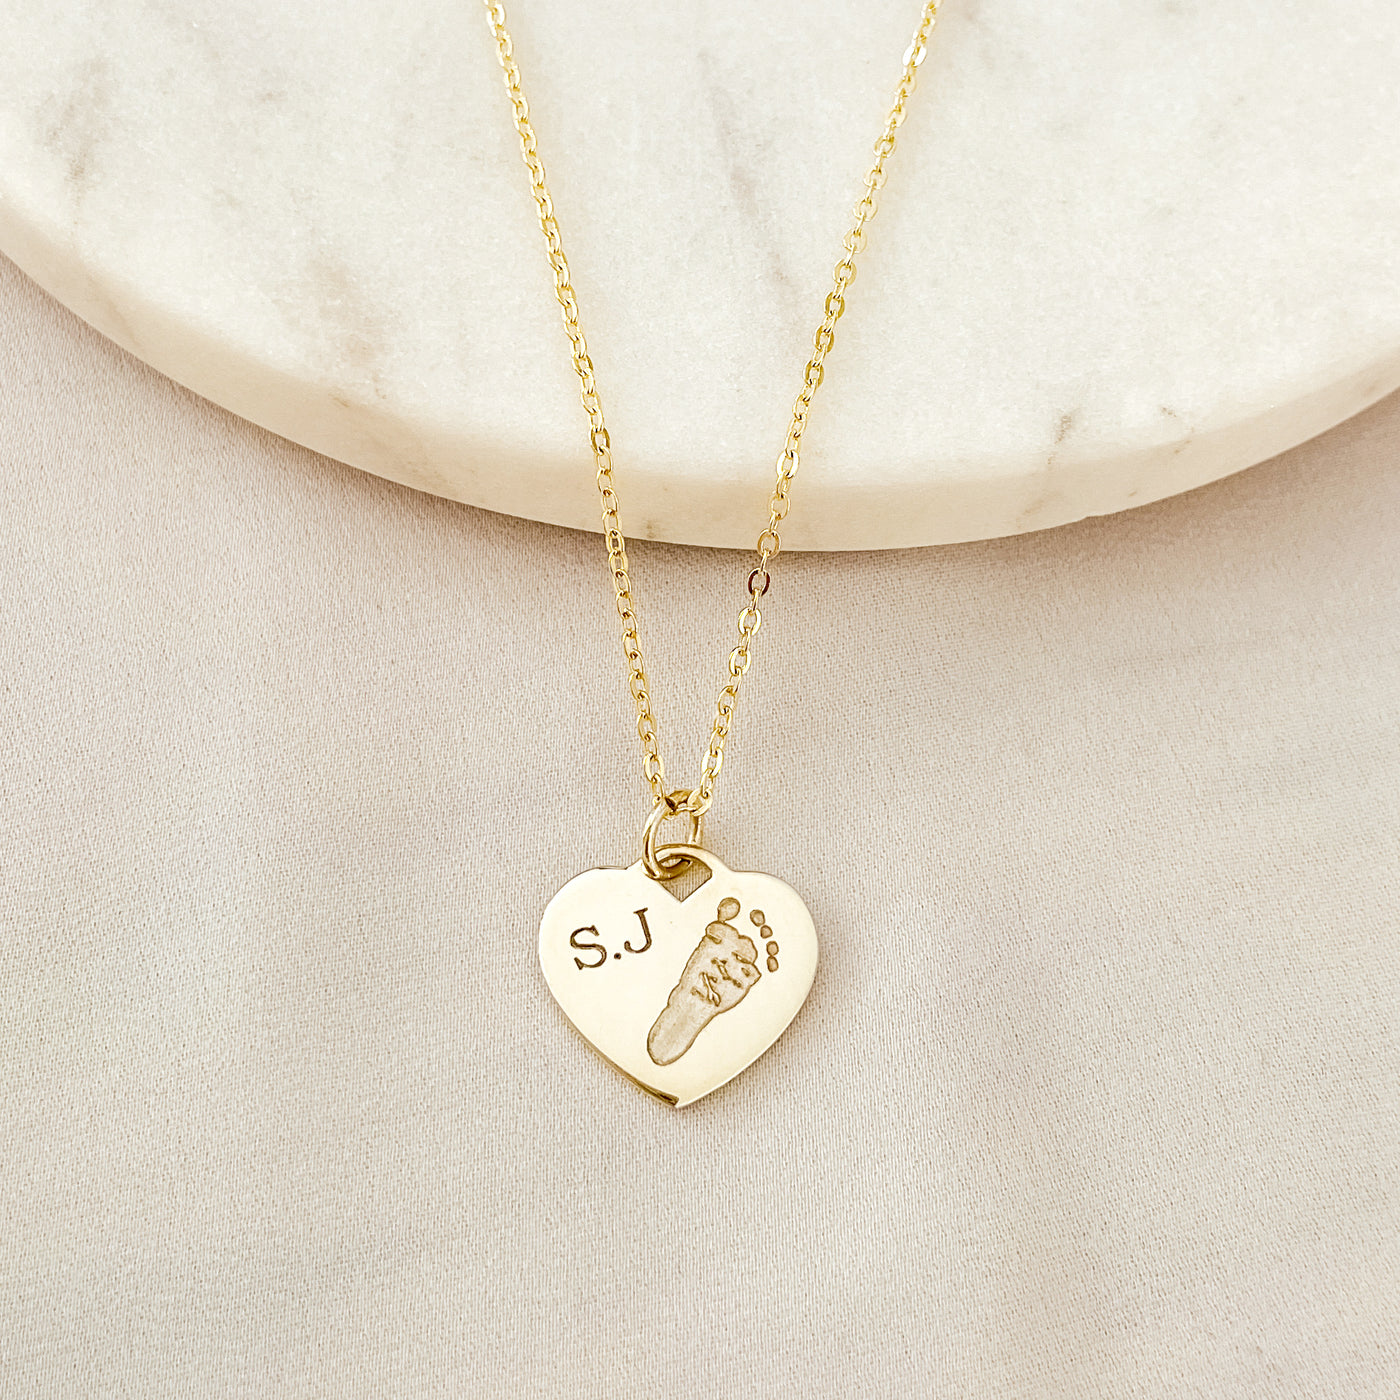 ENGRAVED HANDPRINT & FOOTPRINT HEART CHARM NECKLACE | forever imprint jewellery